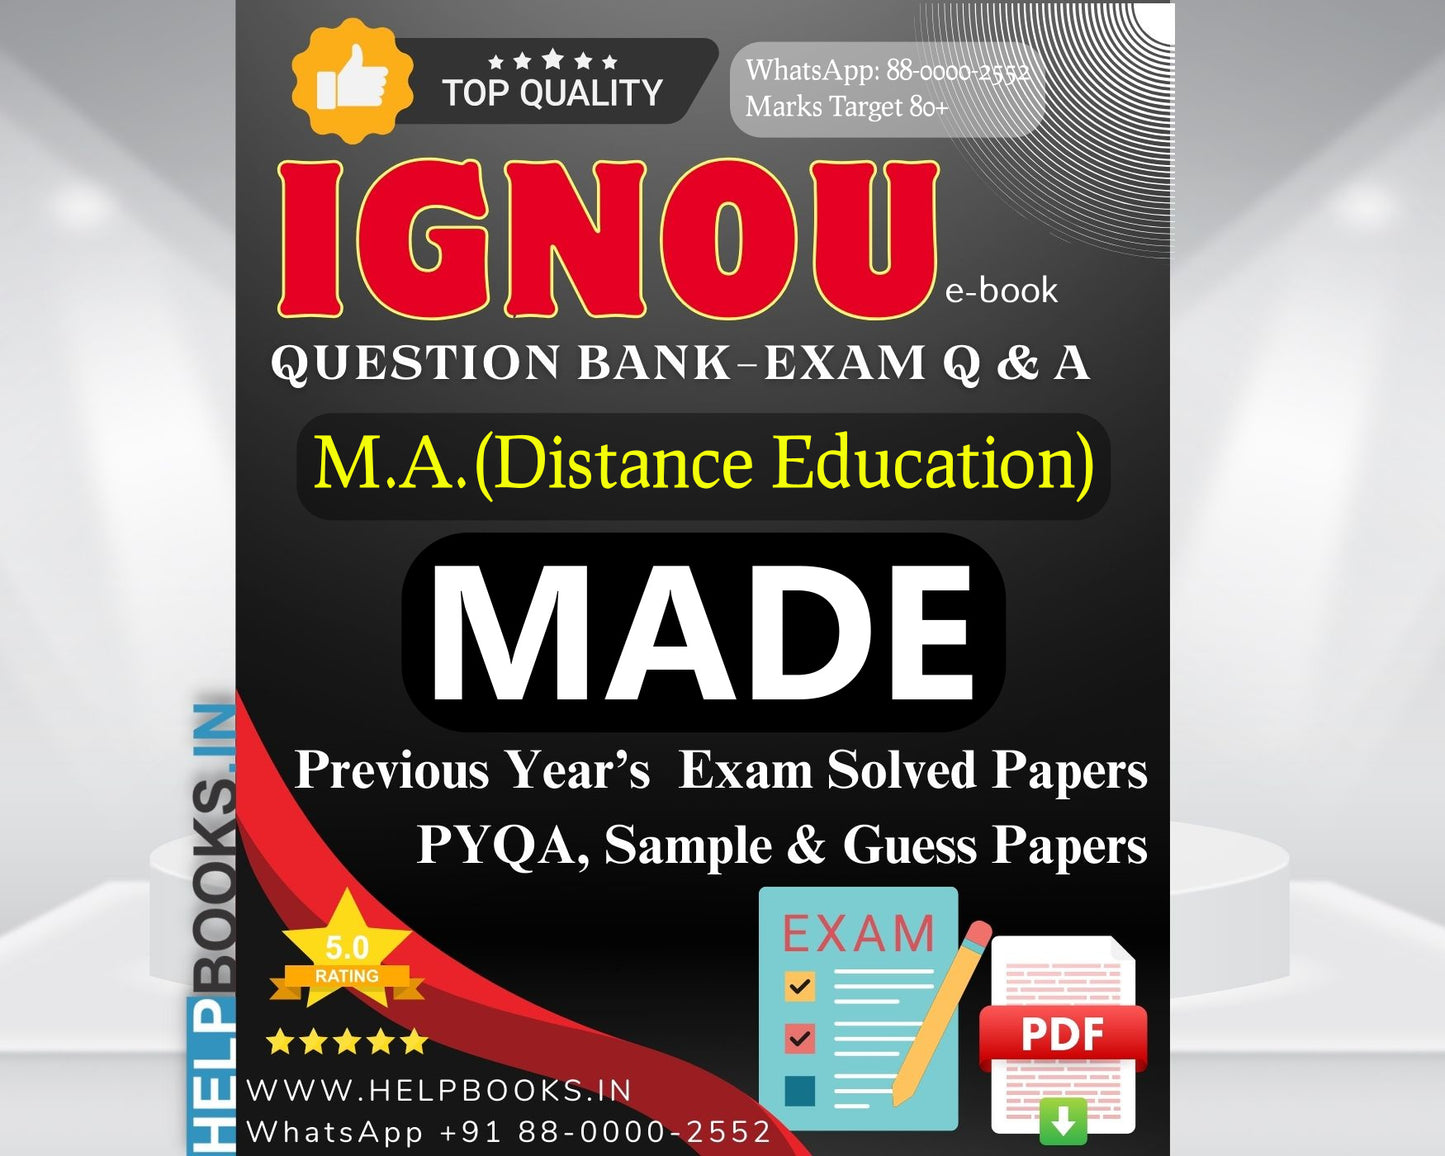 MADE IGNOU Exam Combo of 10 Solved Papers: 5 Previous Years' Solved Papers & 5 Sample Guess Papers for Master of Arts Distance Education